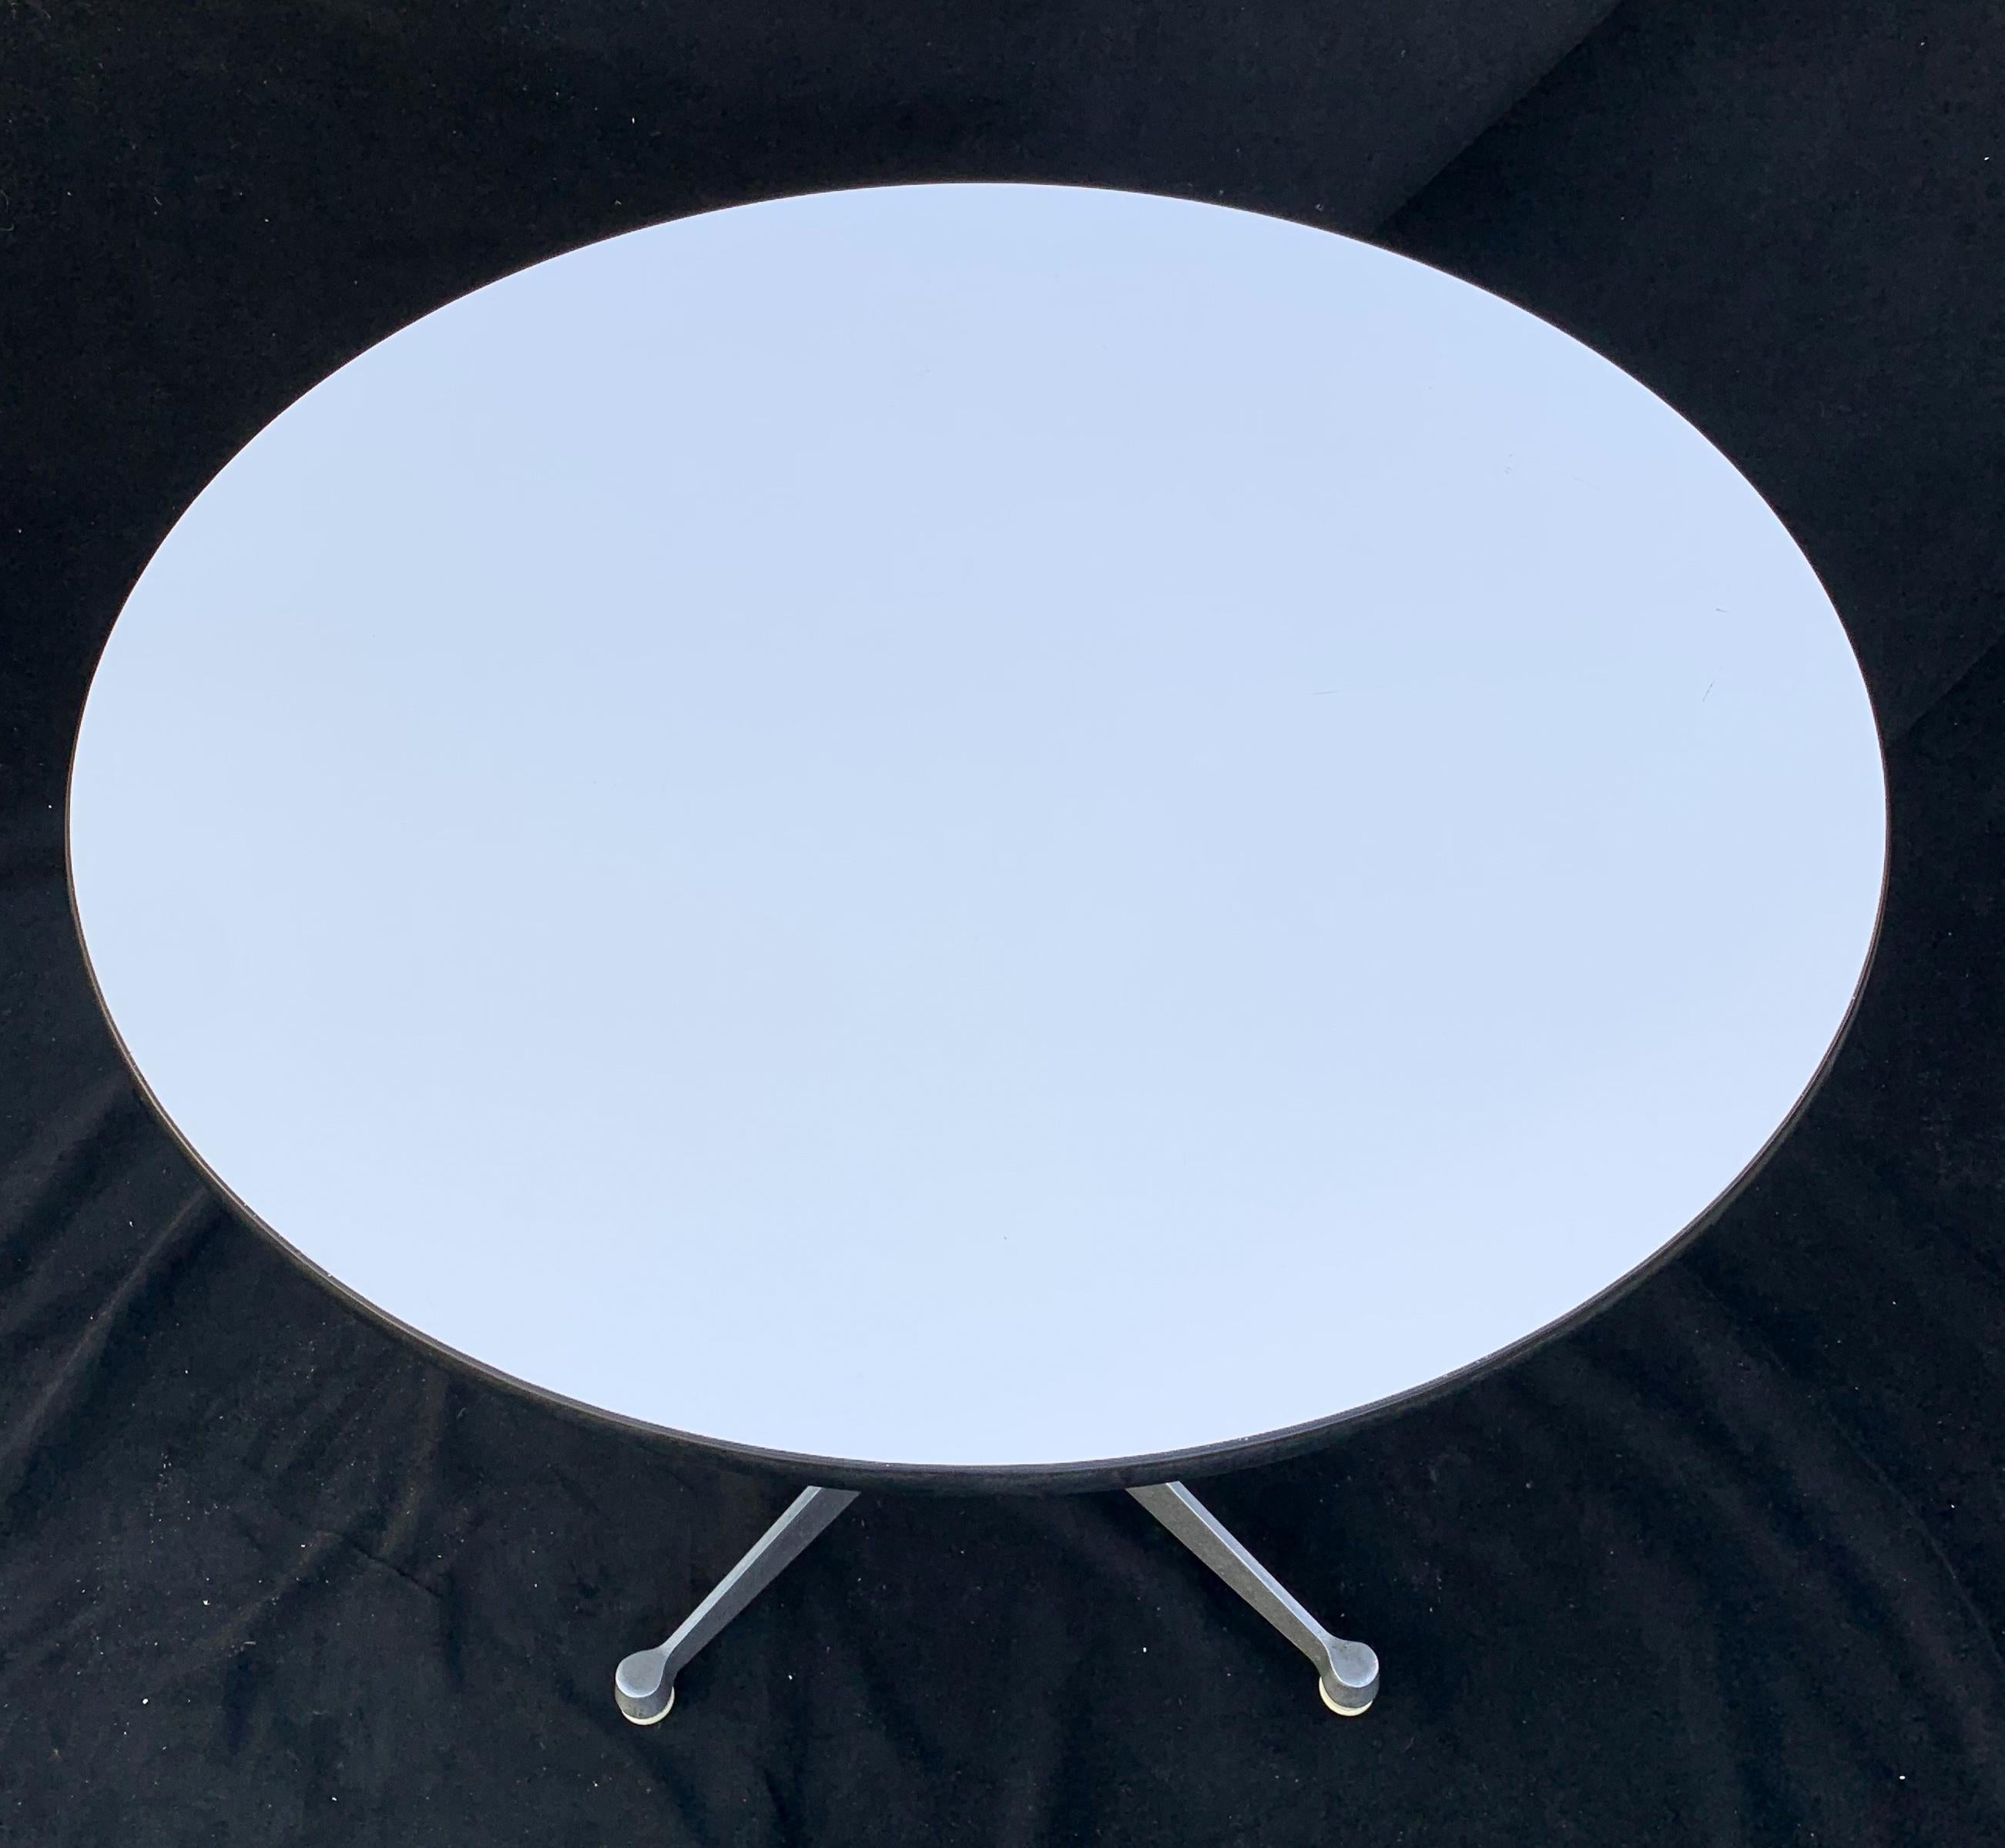 A wonderful Mid-Century Modern Herman Miller round pedestal table having a white laminate top and trim around the outer edge and supported by a black center pole with an aluminum four leg Stand
Herman Miller decal and 